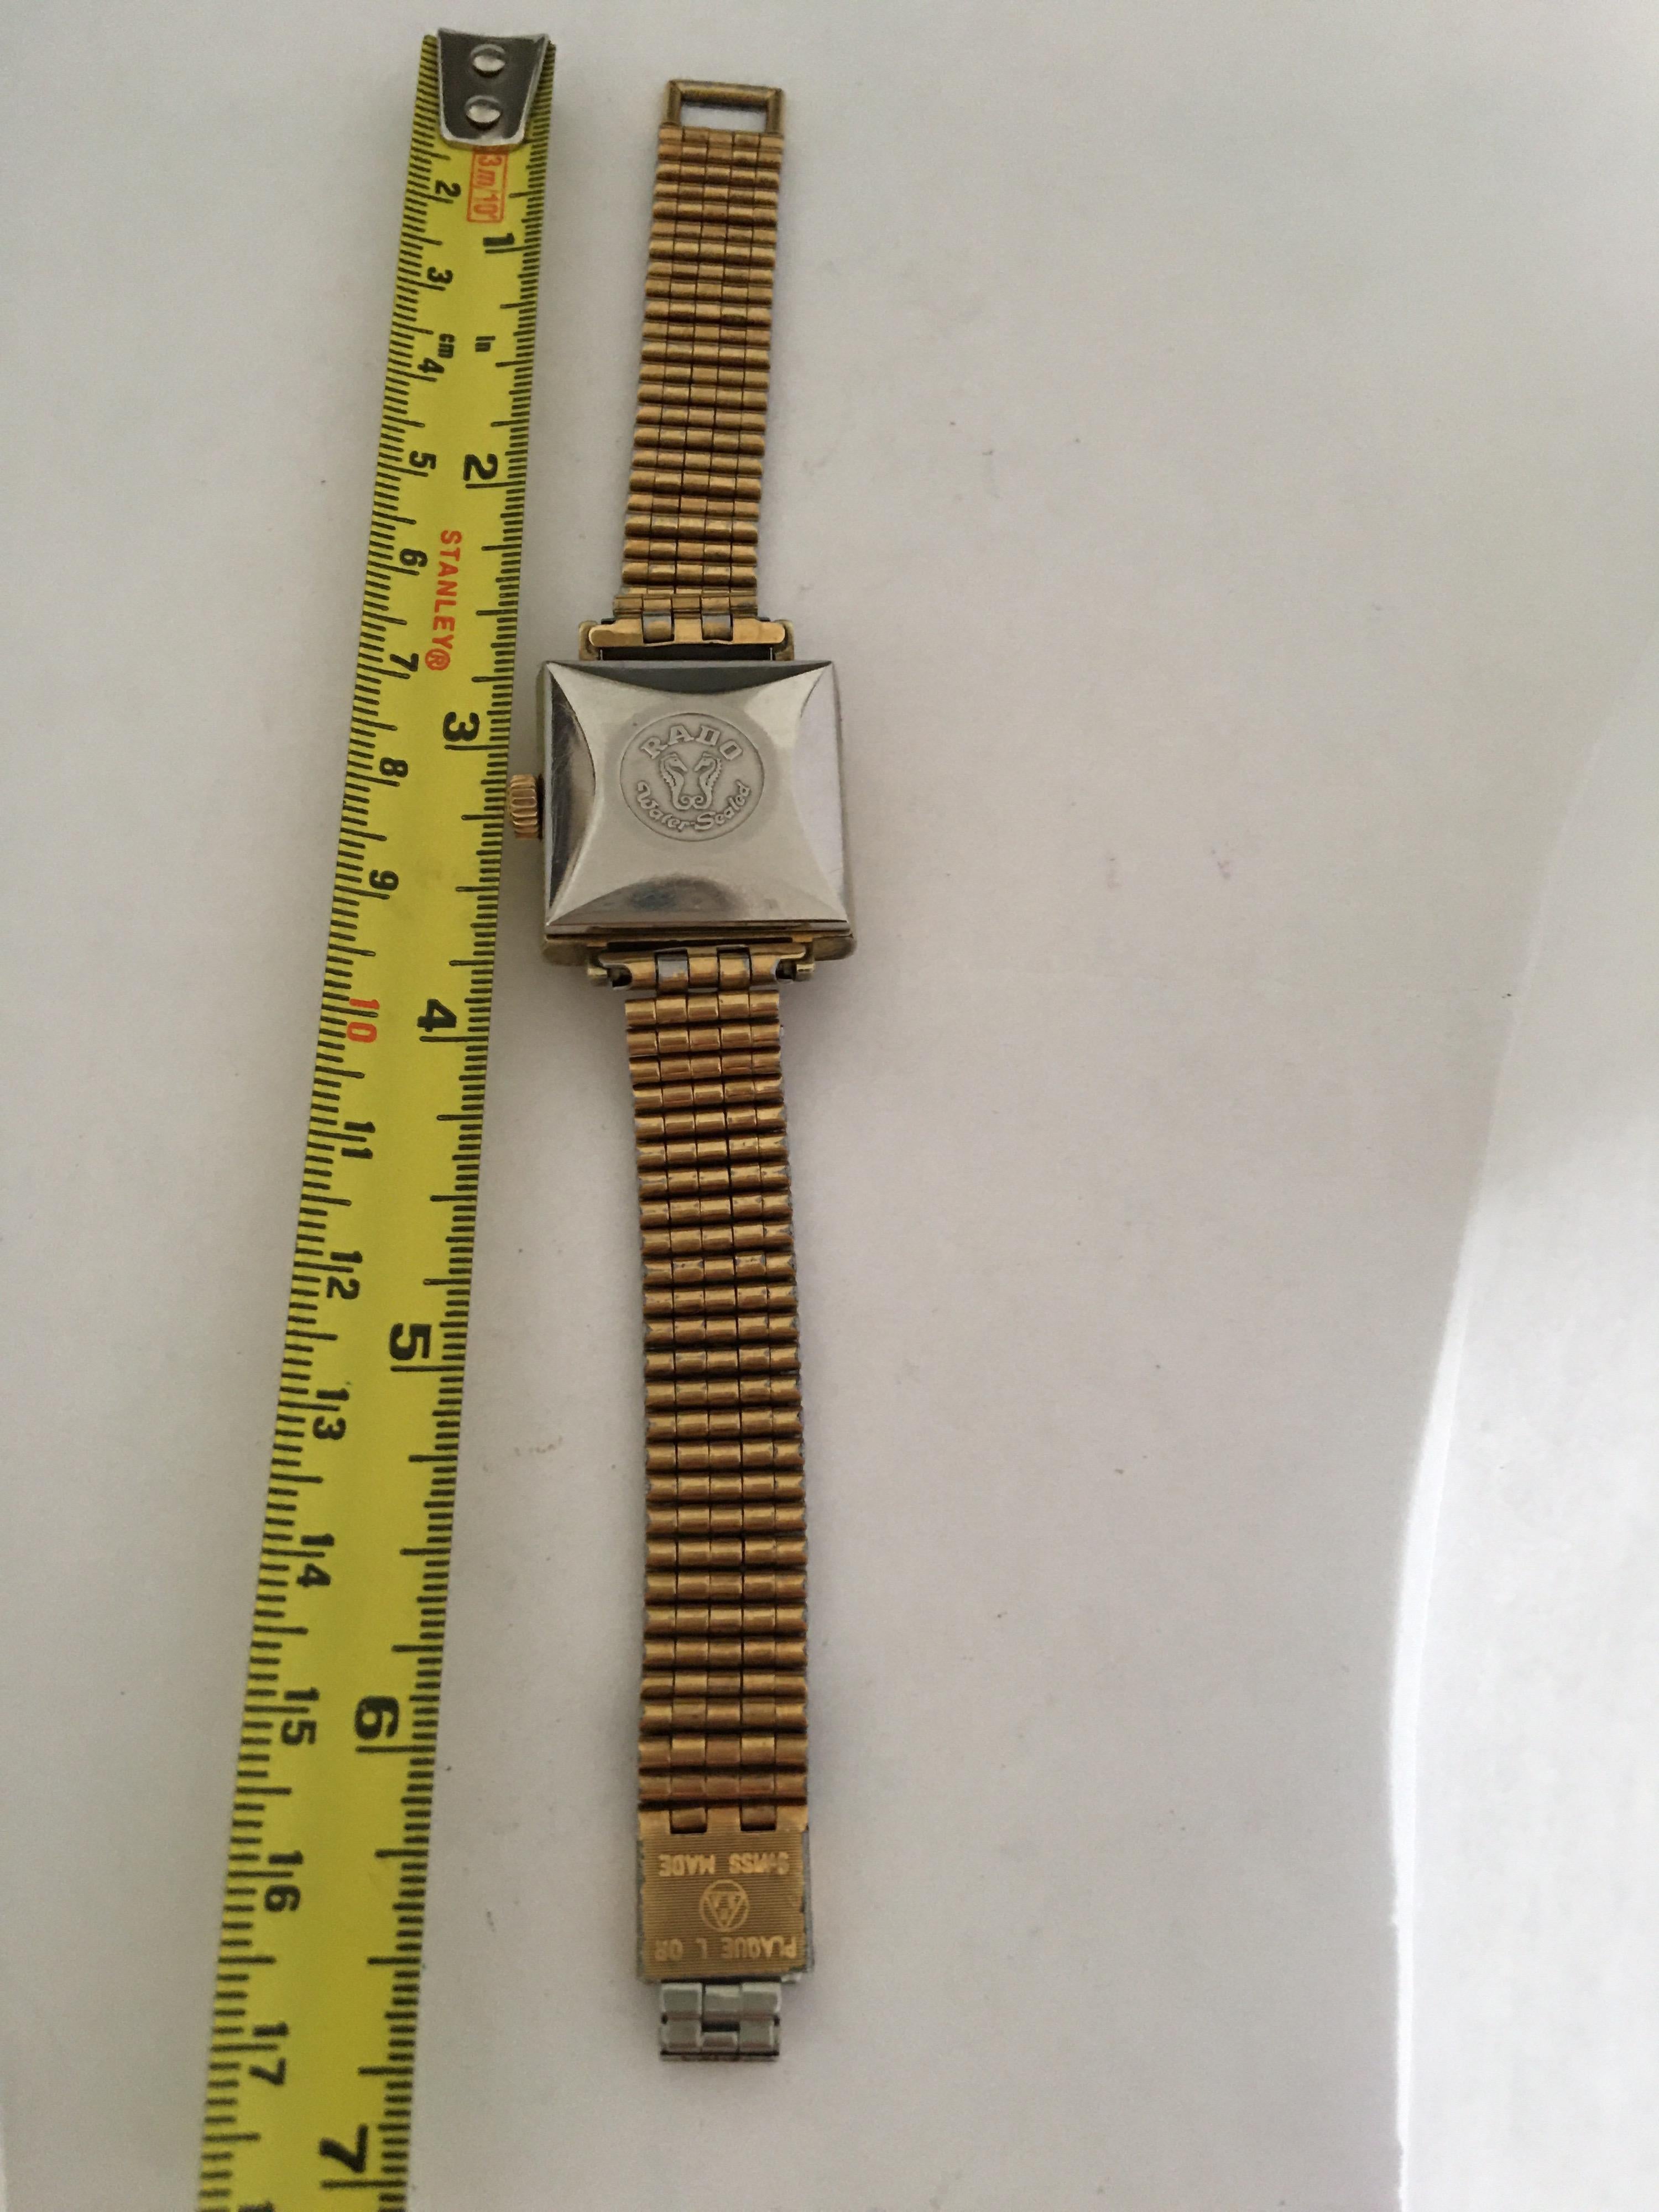 Vintage 1970s Gold-Plated / Stainless Steel Rado Automatic Watch For Sale 3